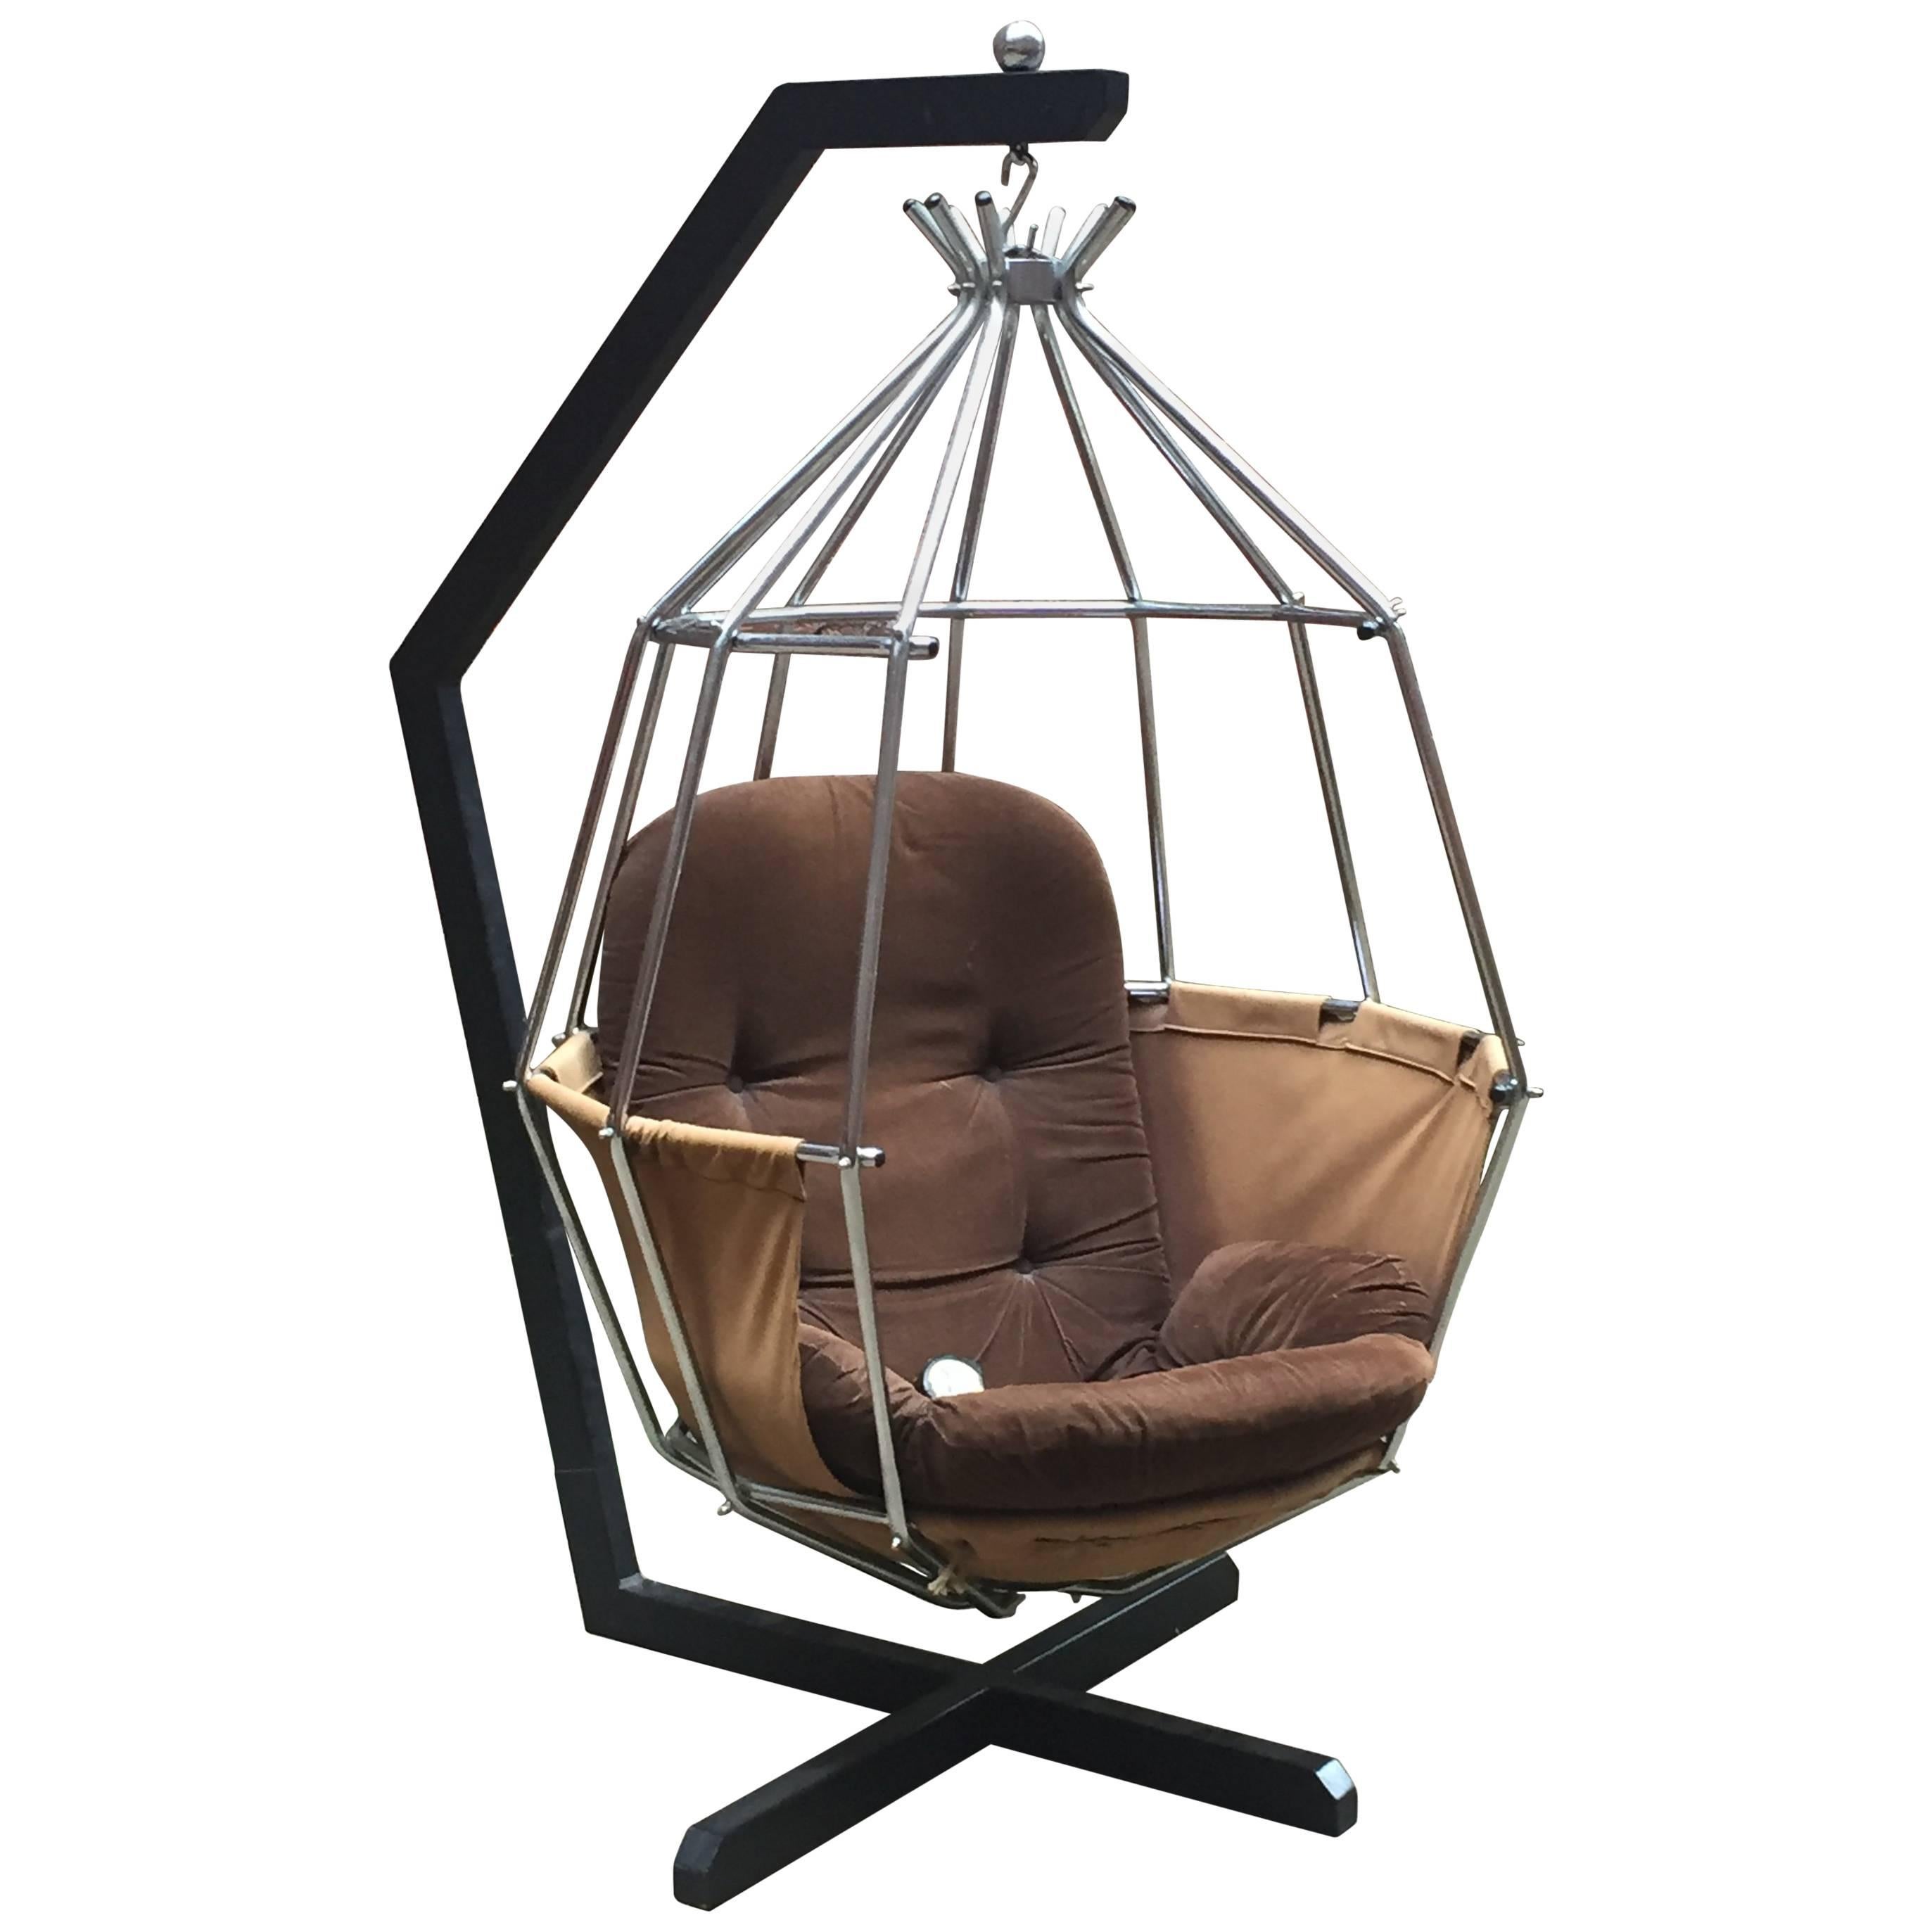 Ib Arberg Parrot Cage Swing Chair